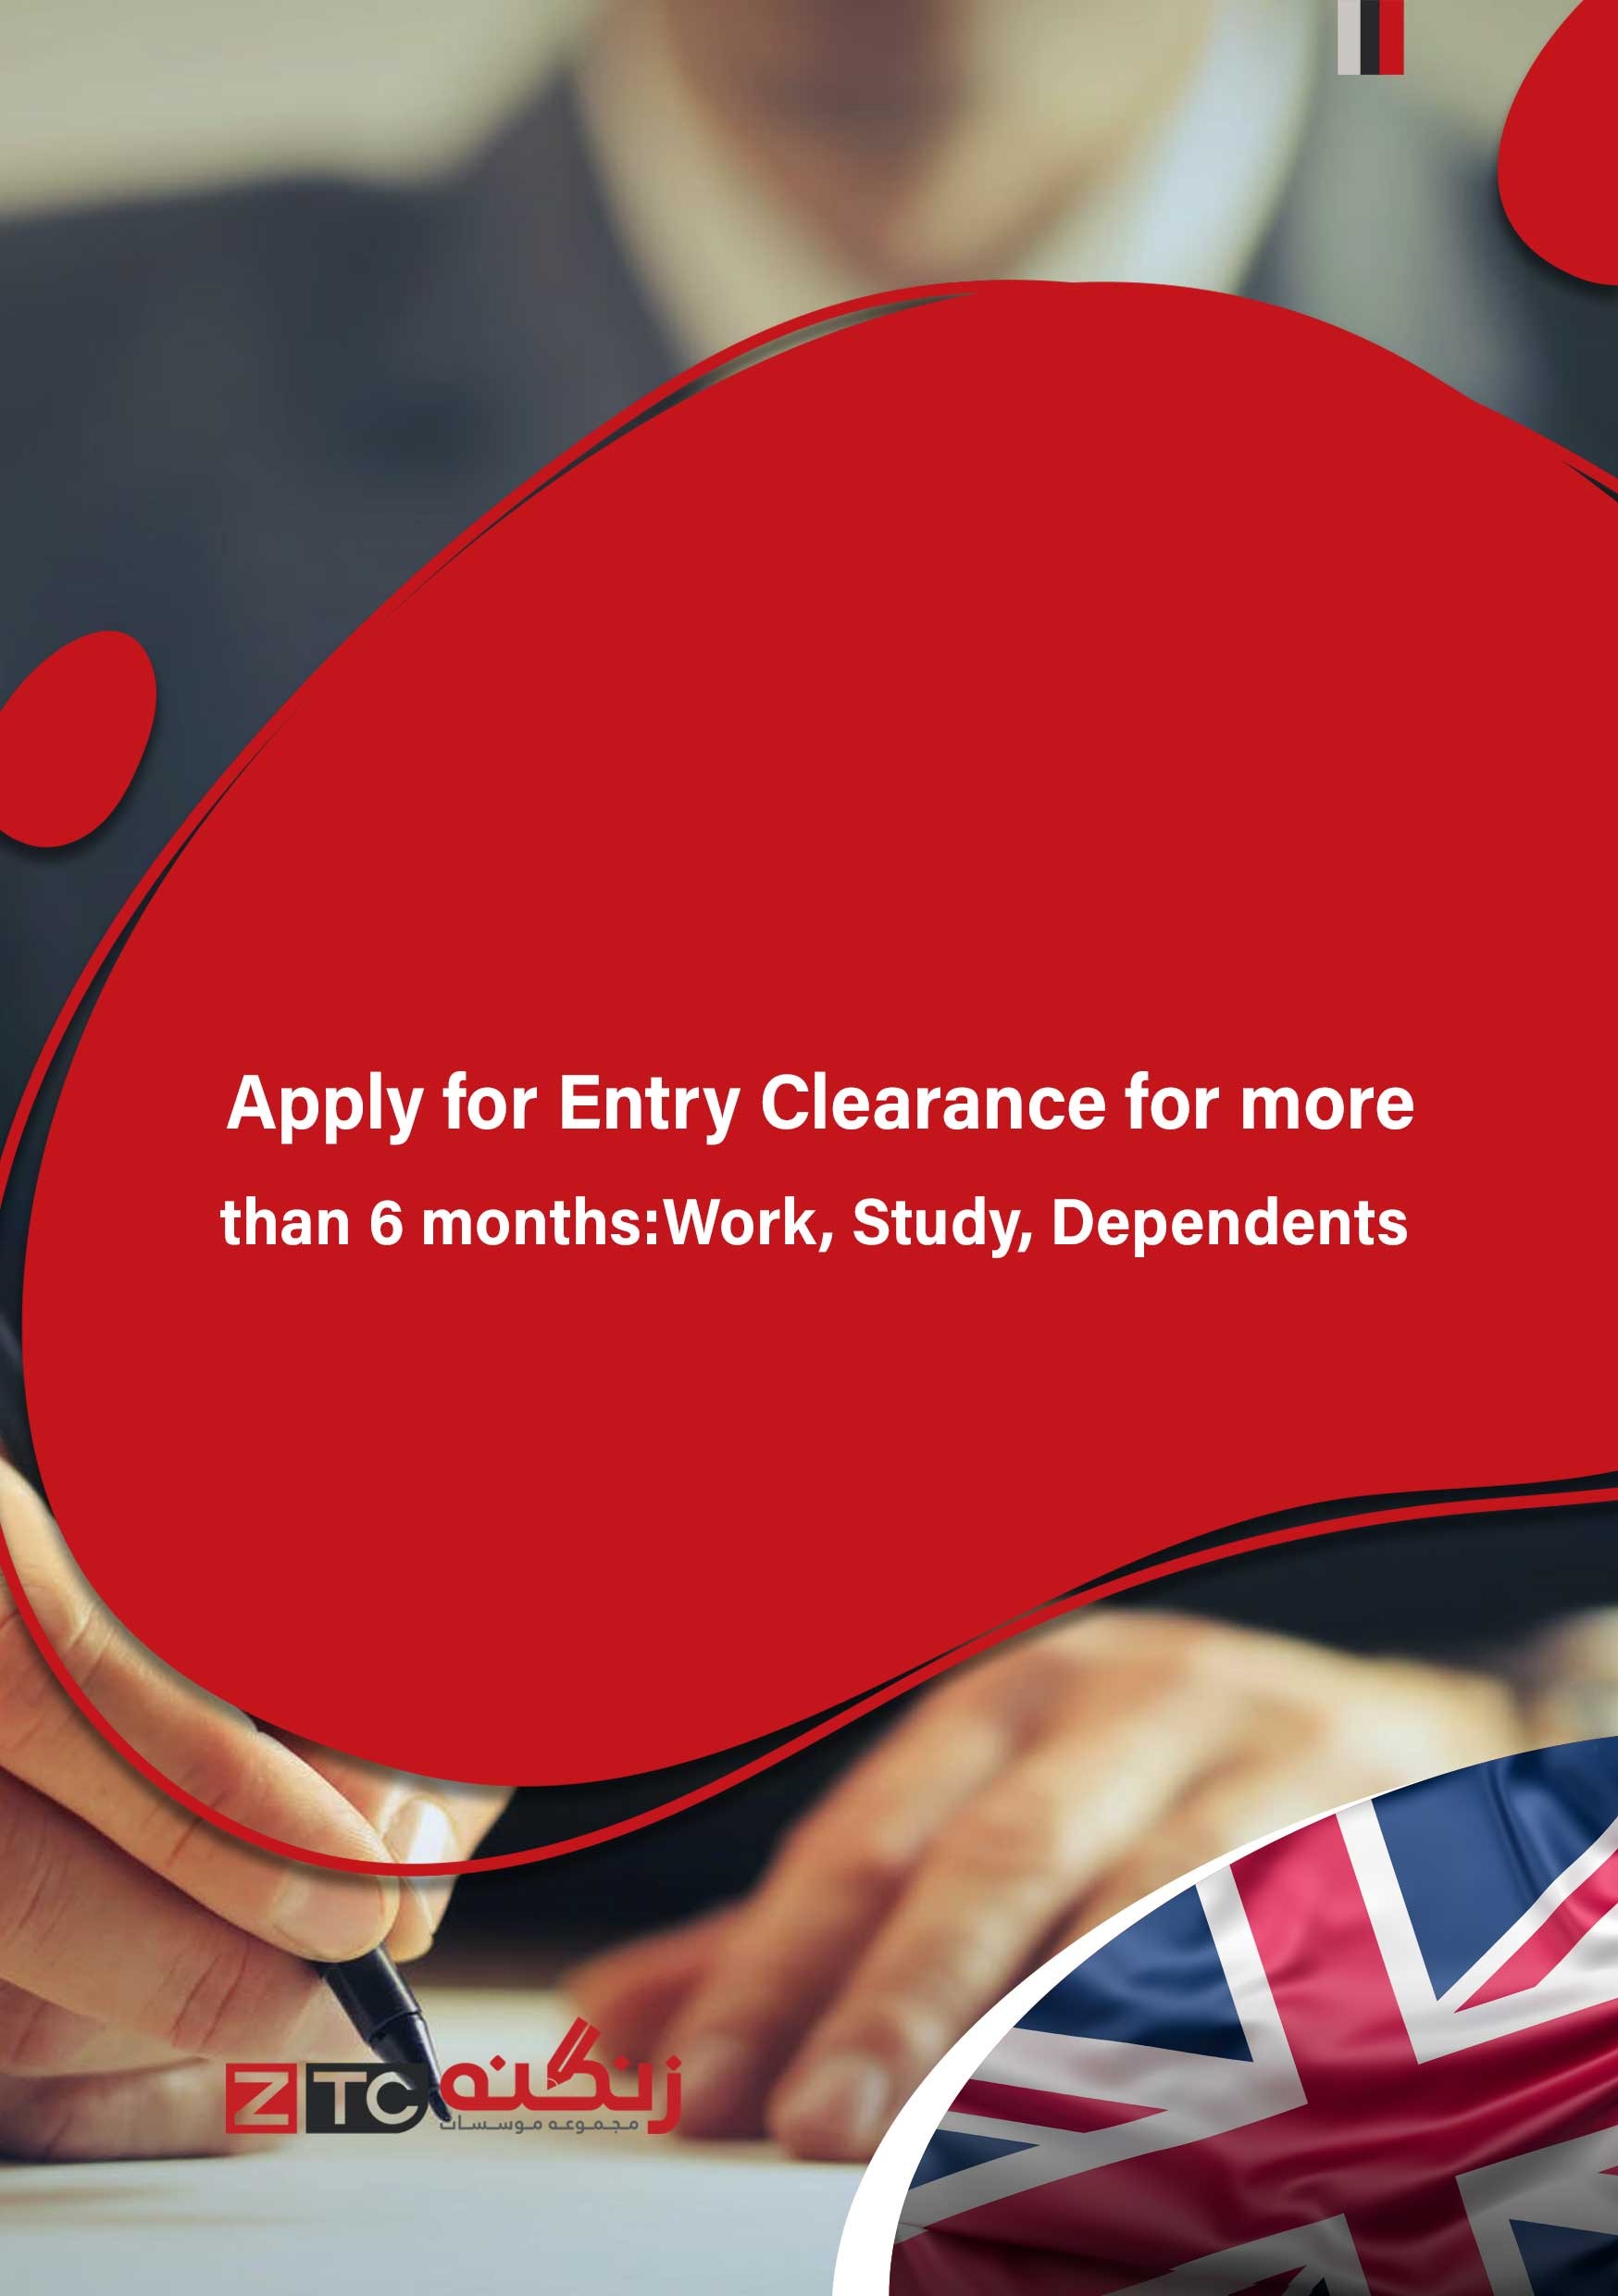 Apply for Entry Clearance for more than 6 months - Work, Study, Dependents